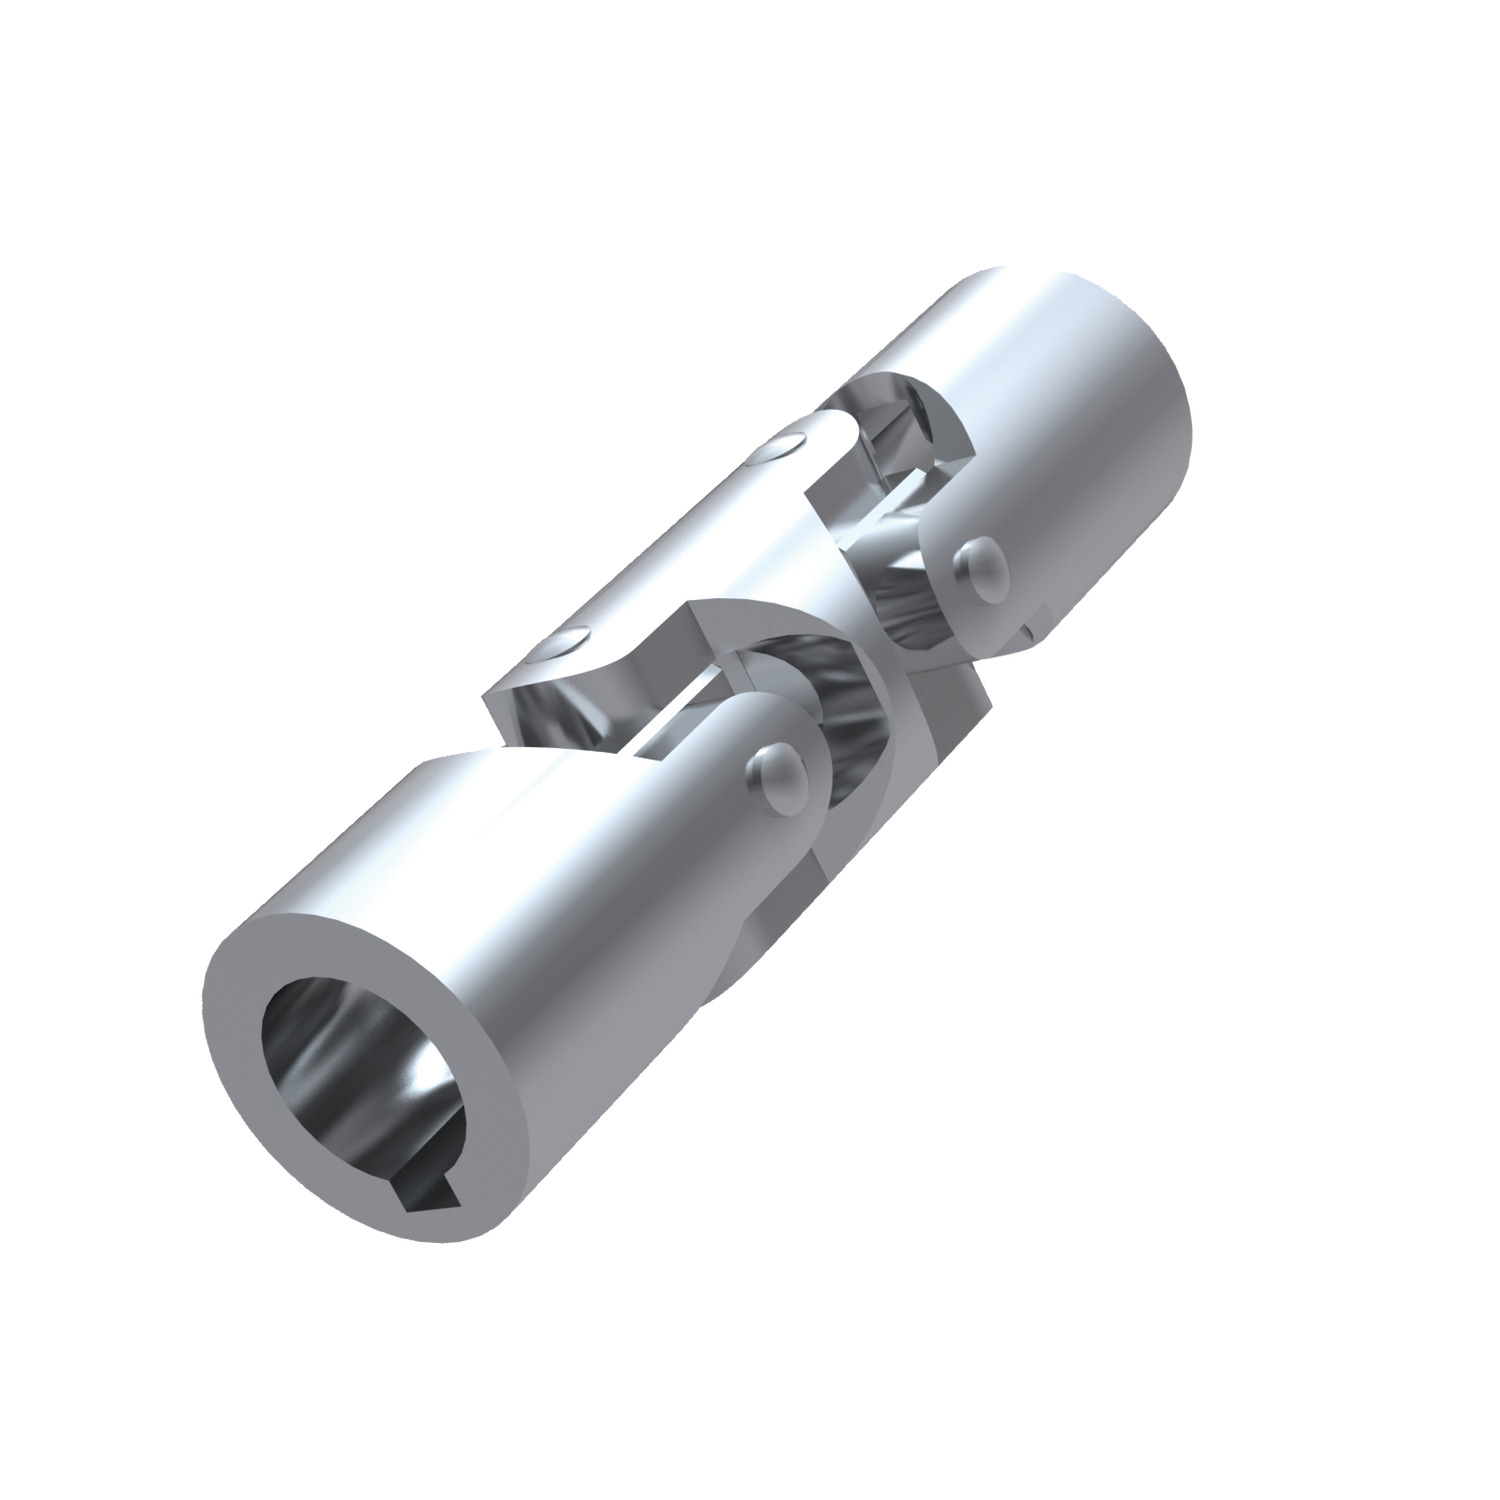 Double Universal Joint Steel double universal joints manufactured to DIN 808/7551. Maximum bending angle of 45° per joint.